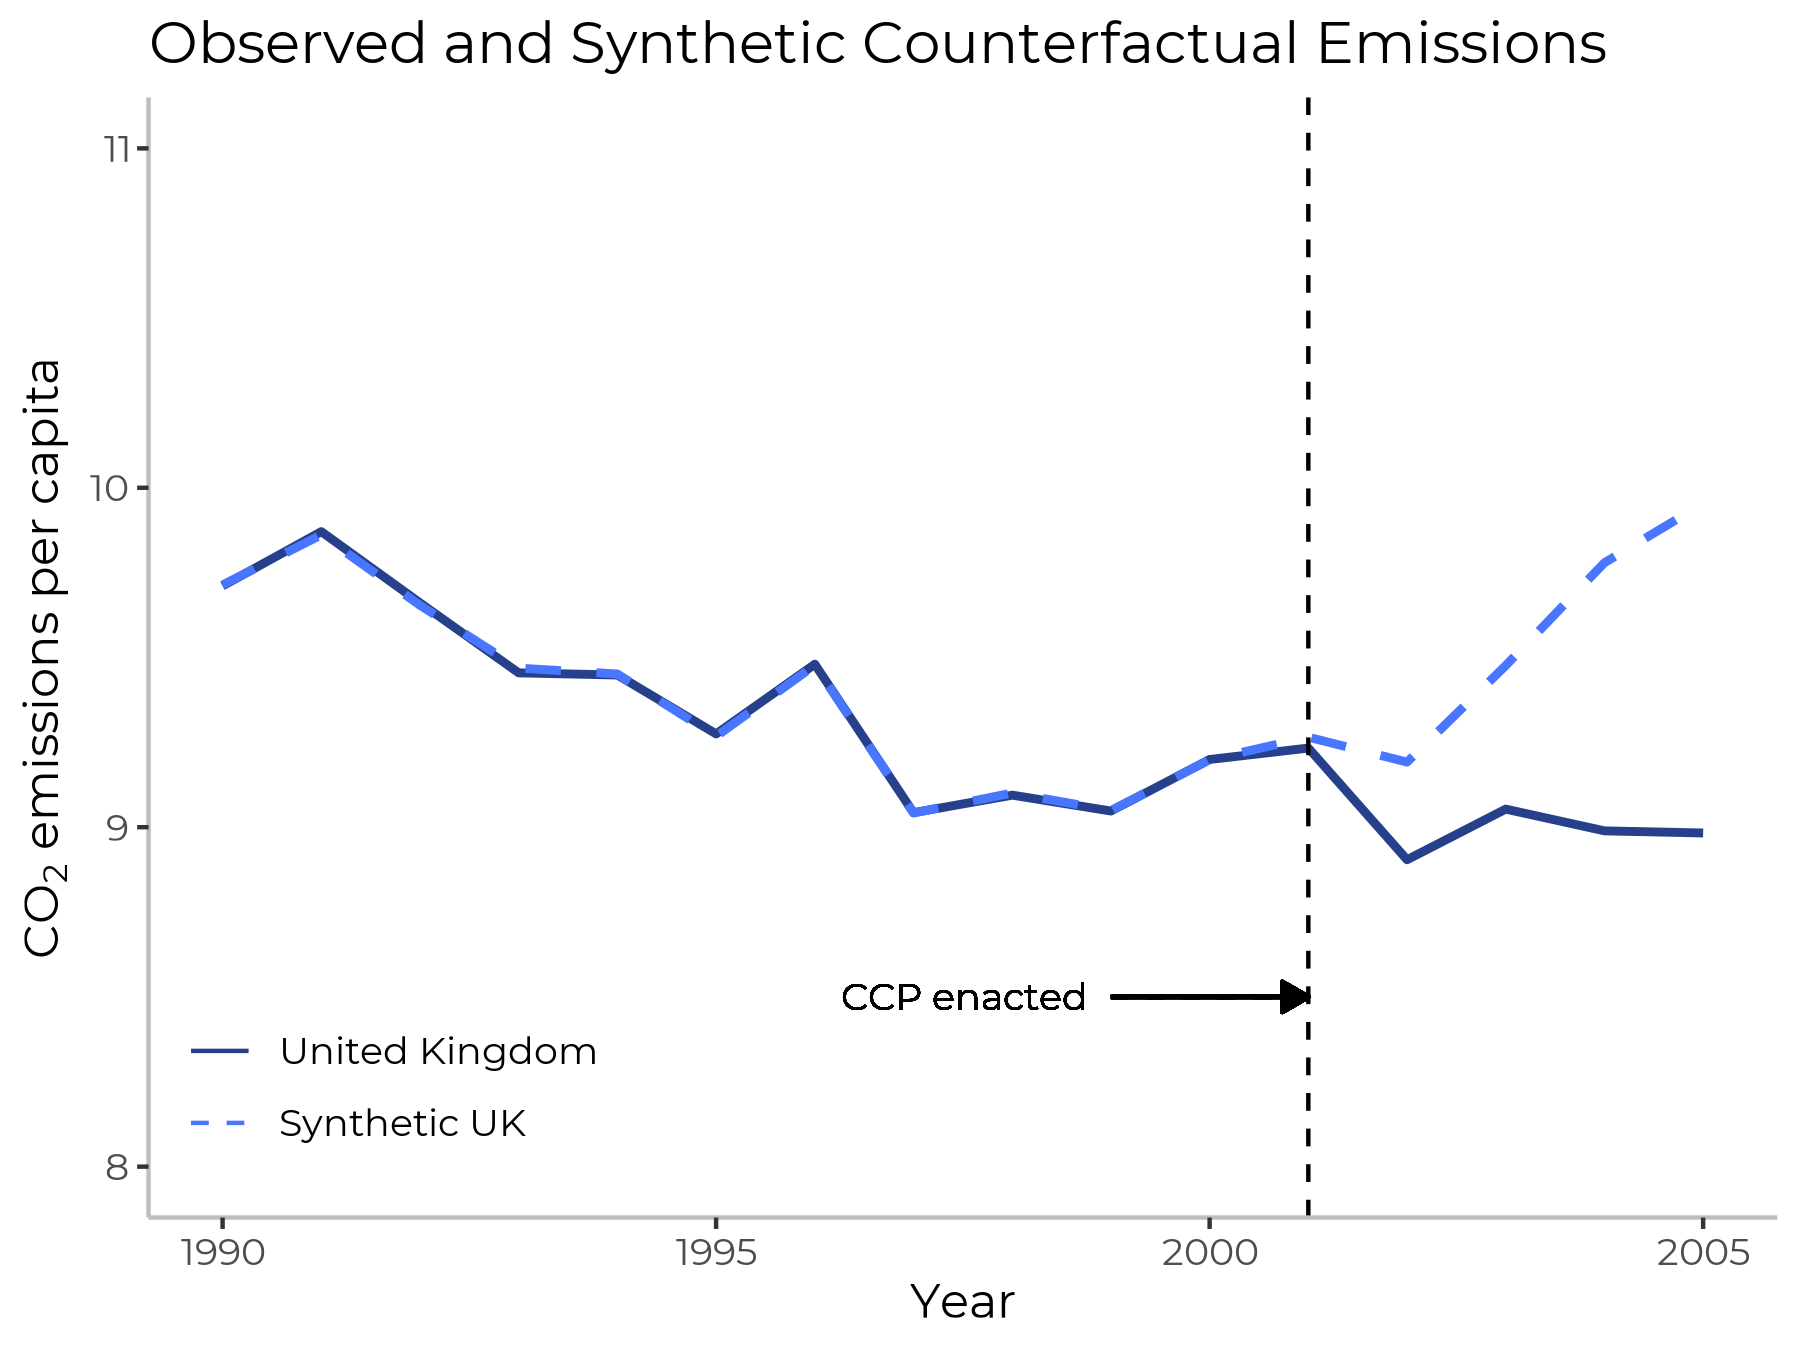 Emissions trajectories in treated and synthetic control